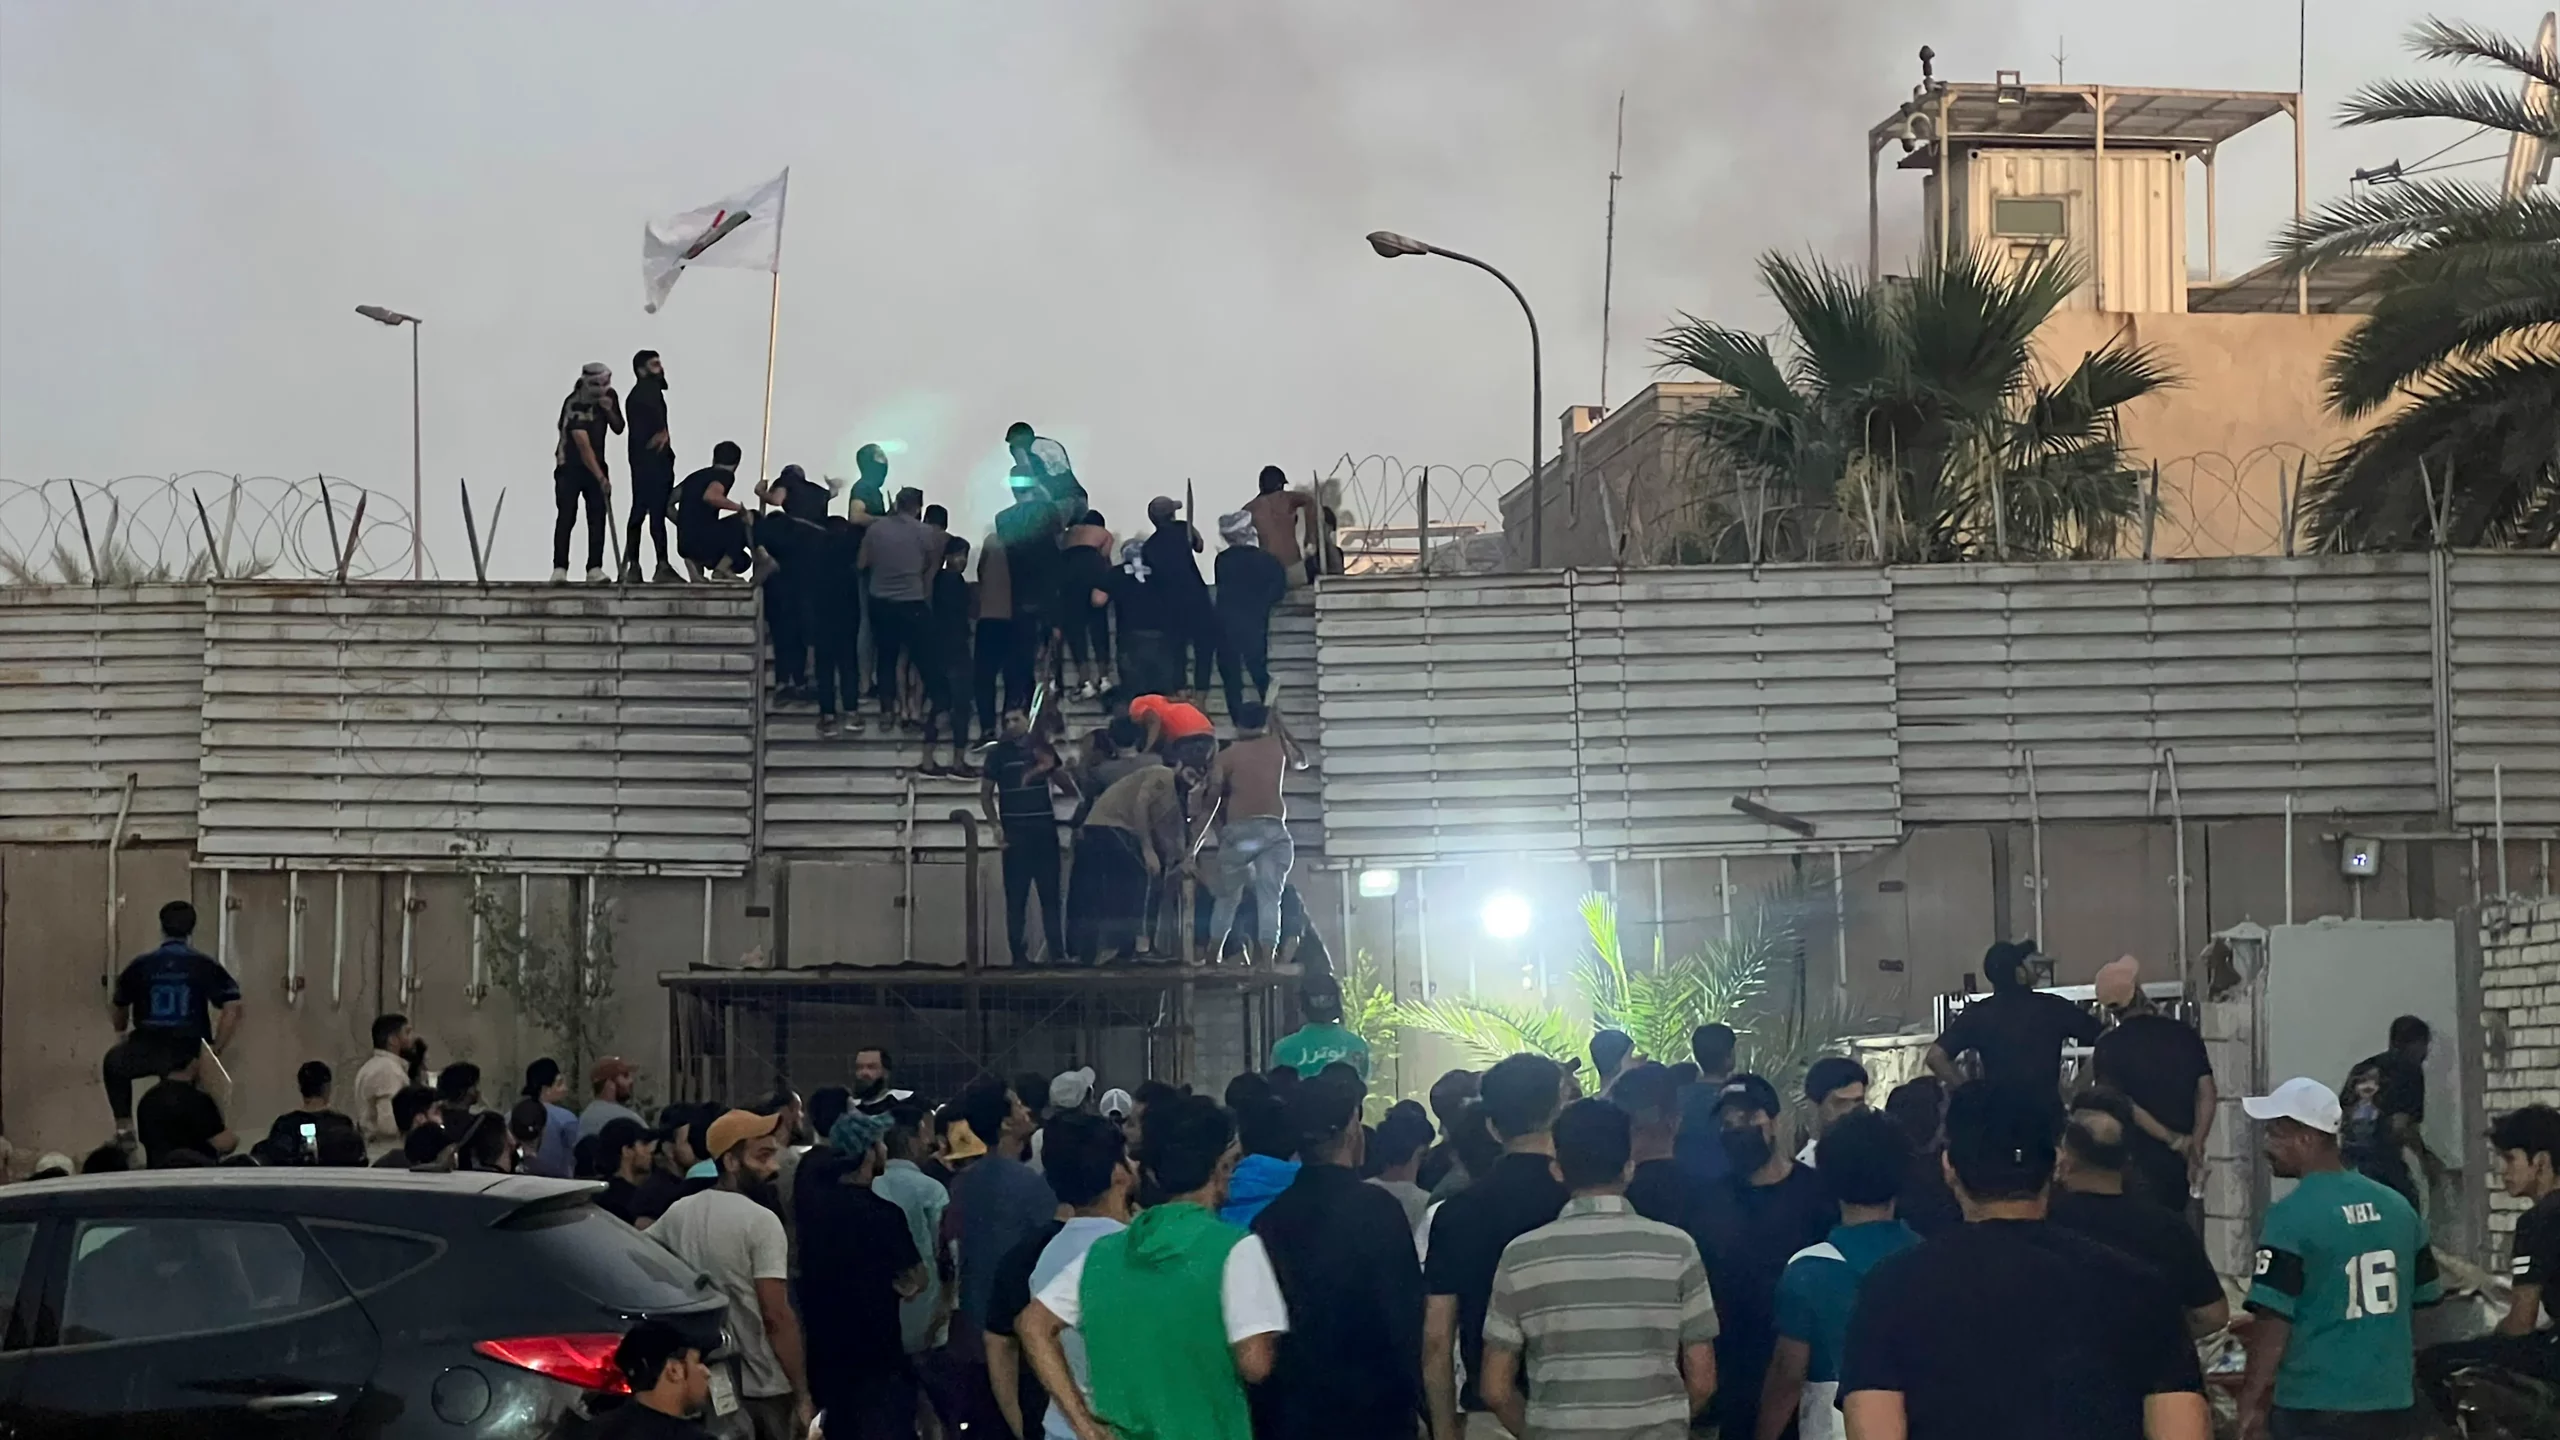 Protesters scaling walls of Swedish Embassy in Iraq